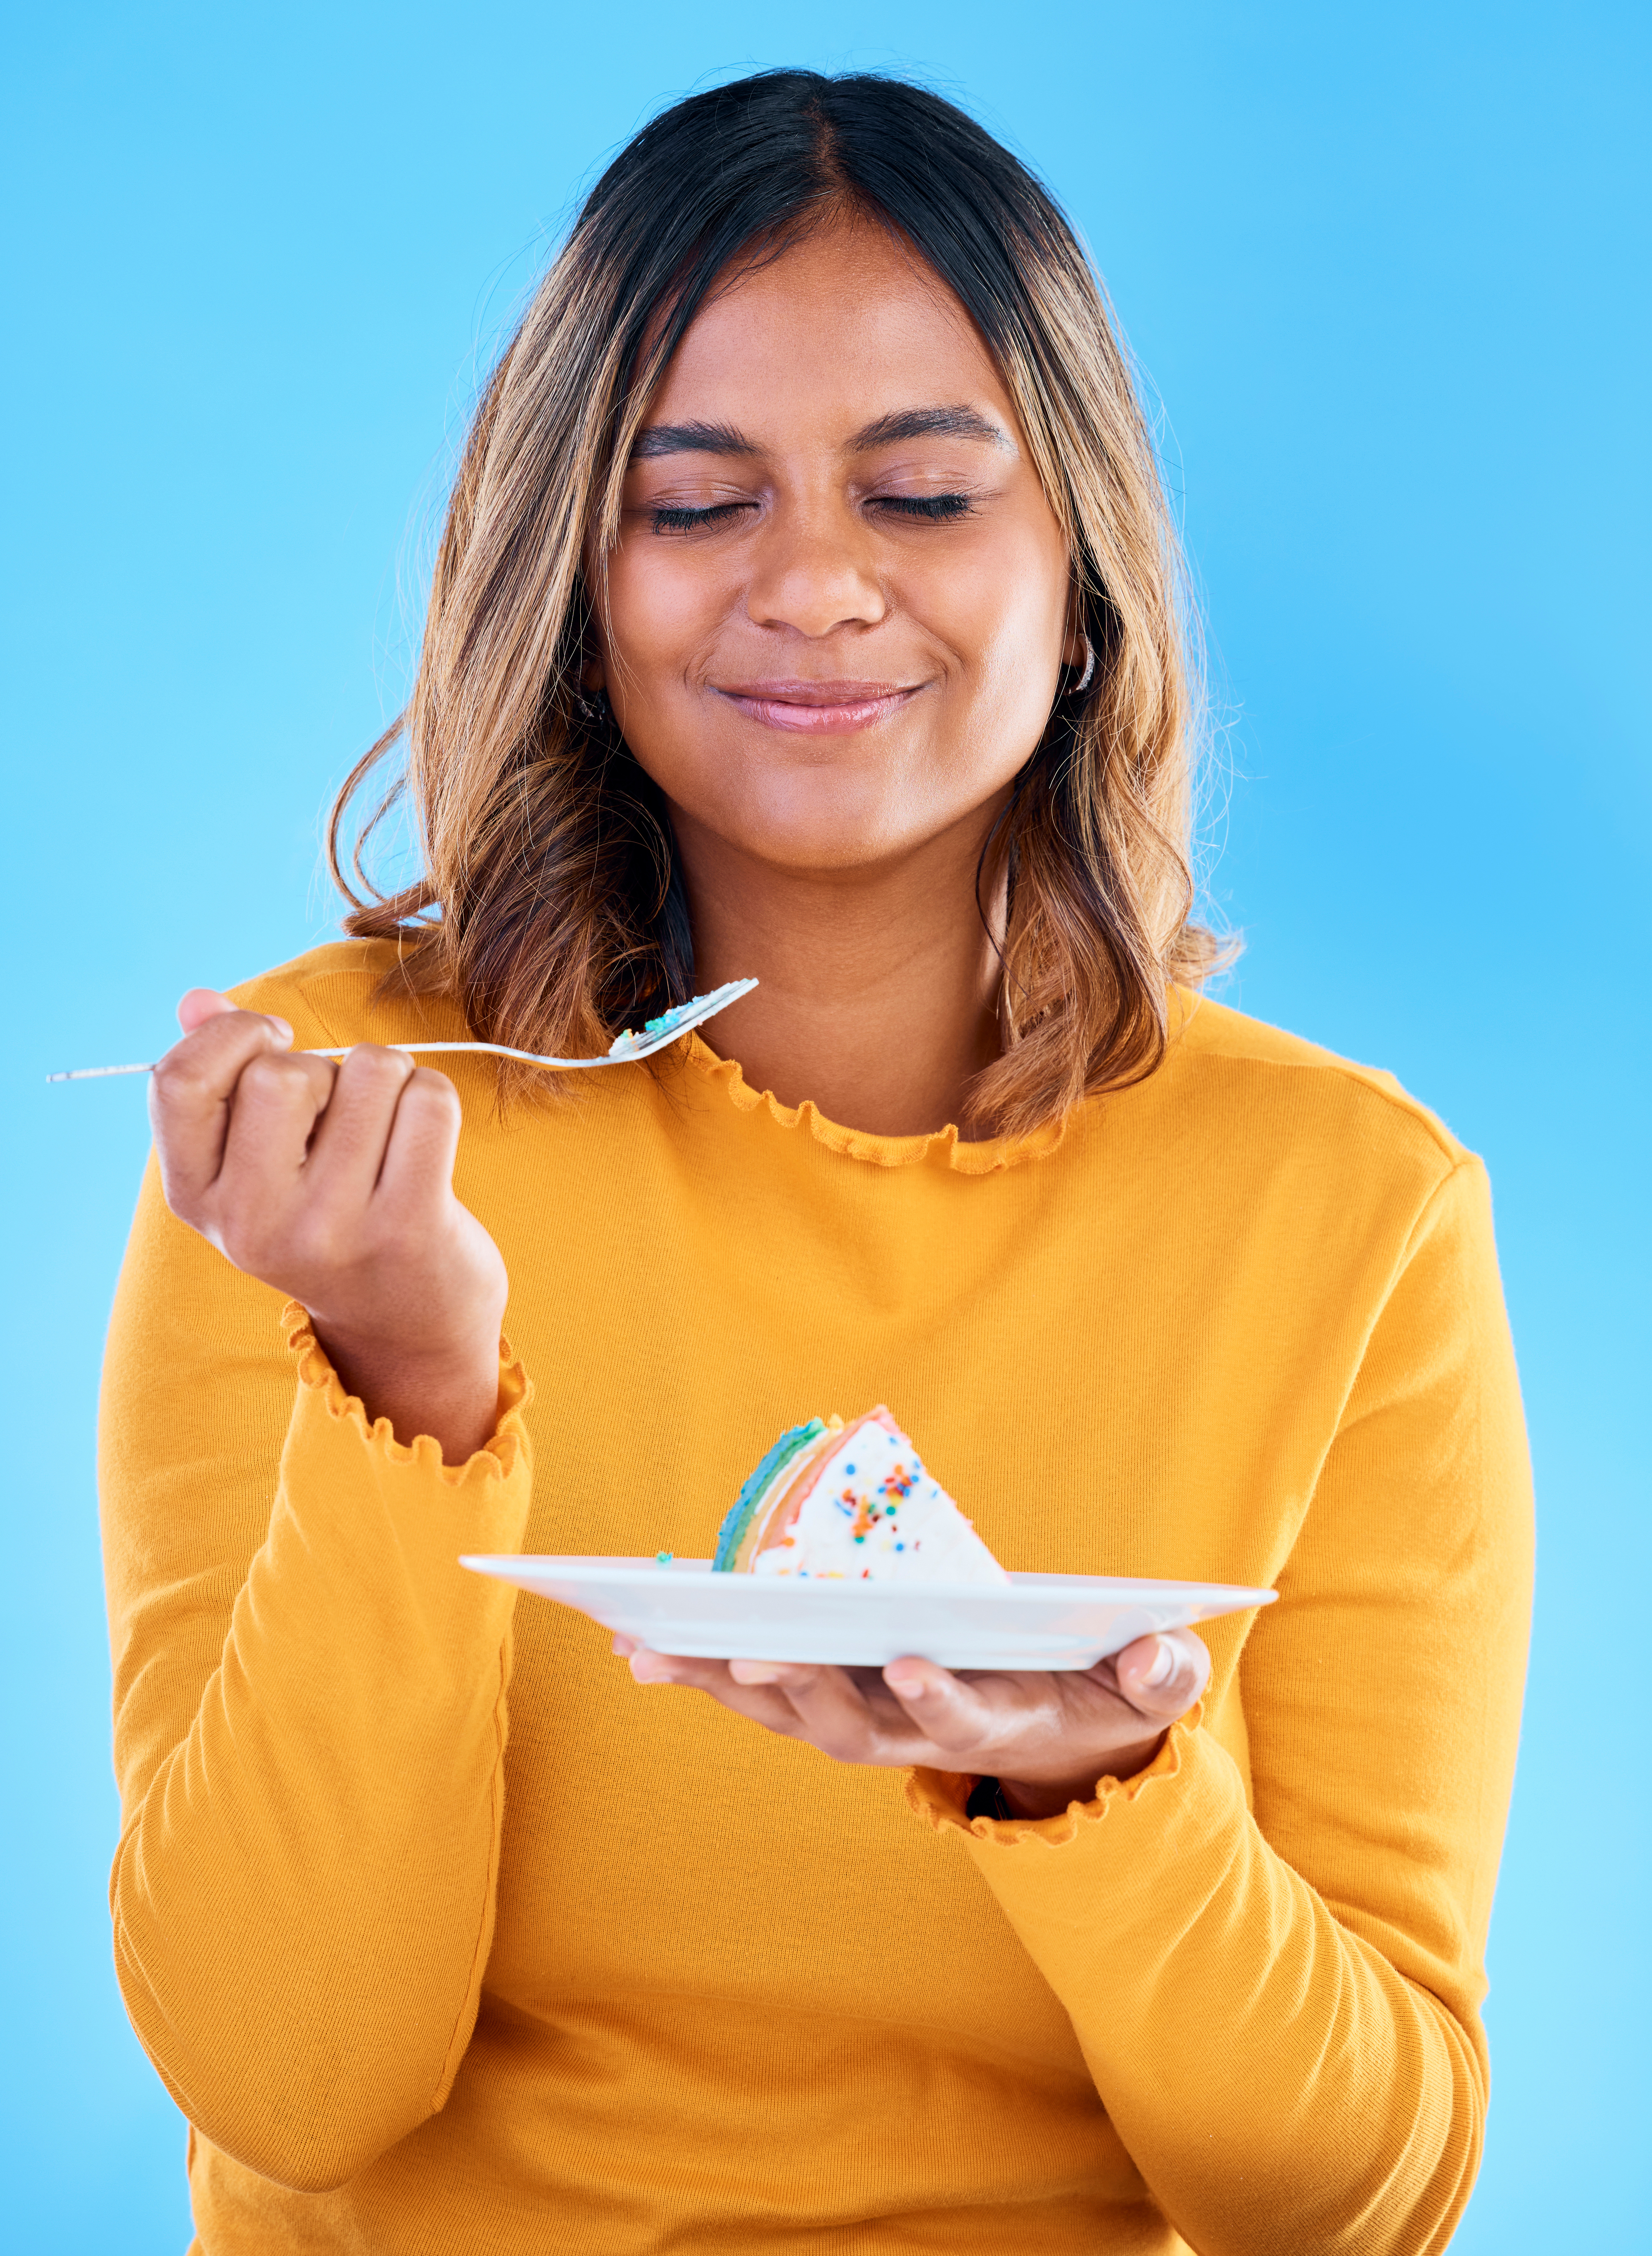 A woman in a yellow long-sleeved T-shirt enjoying a slice of cake